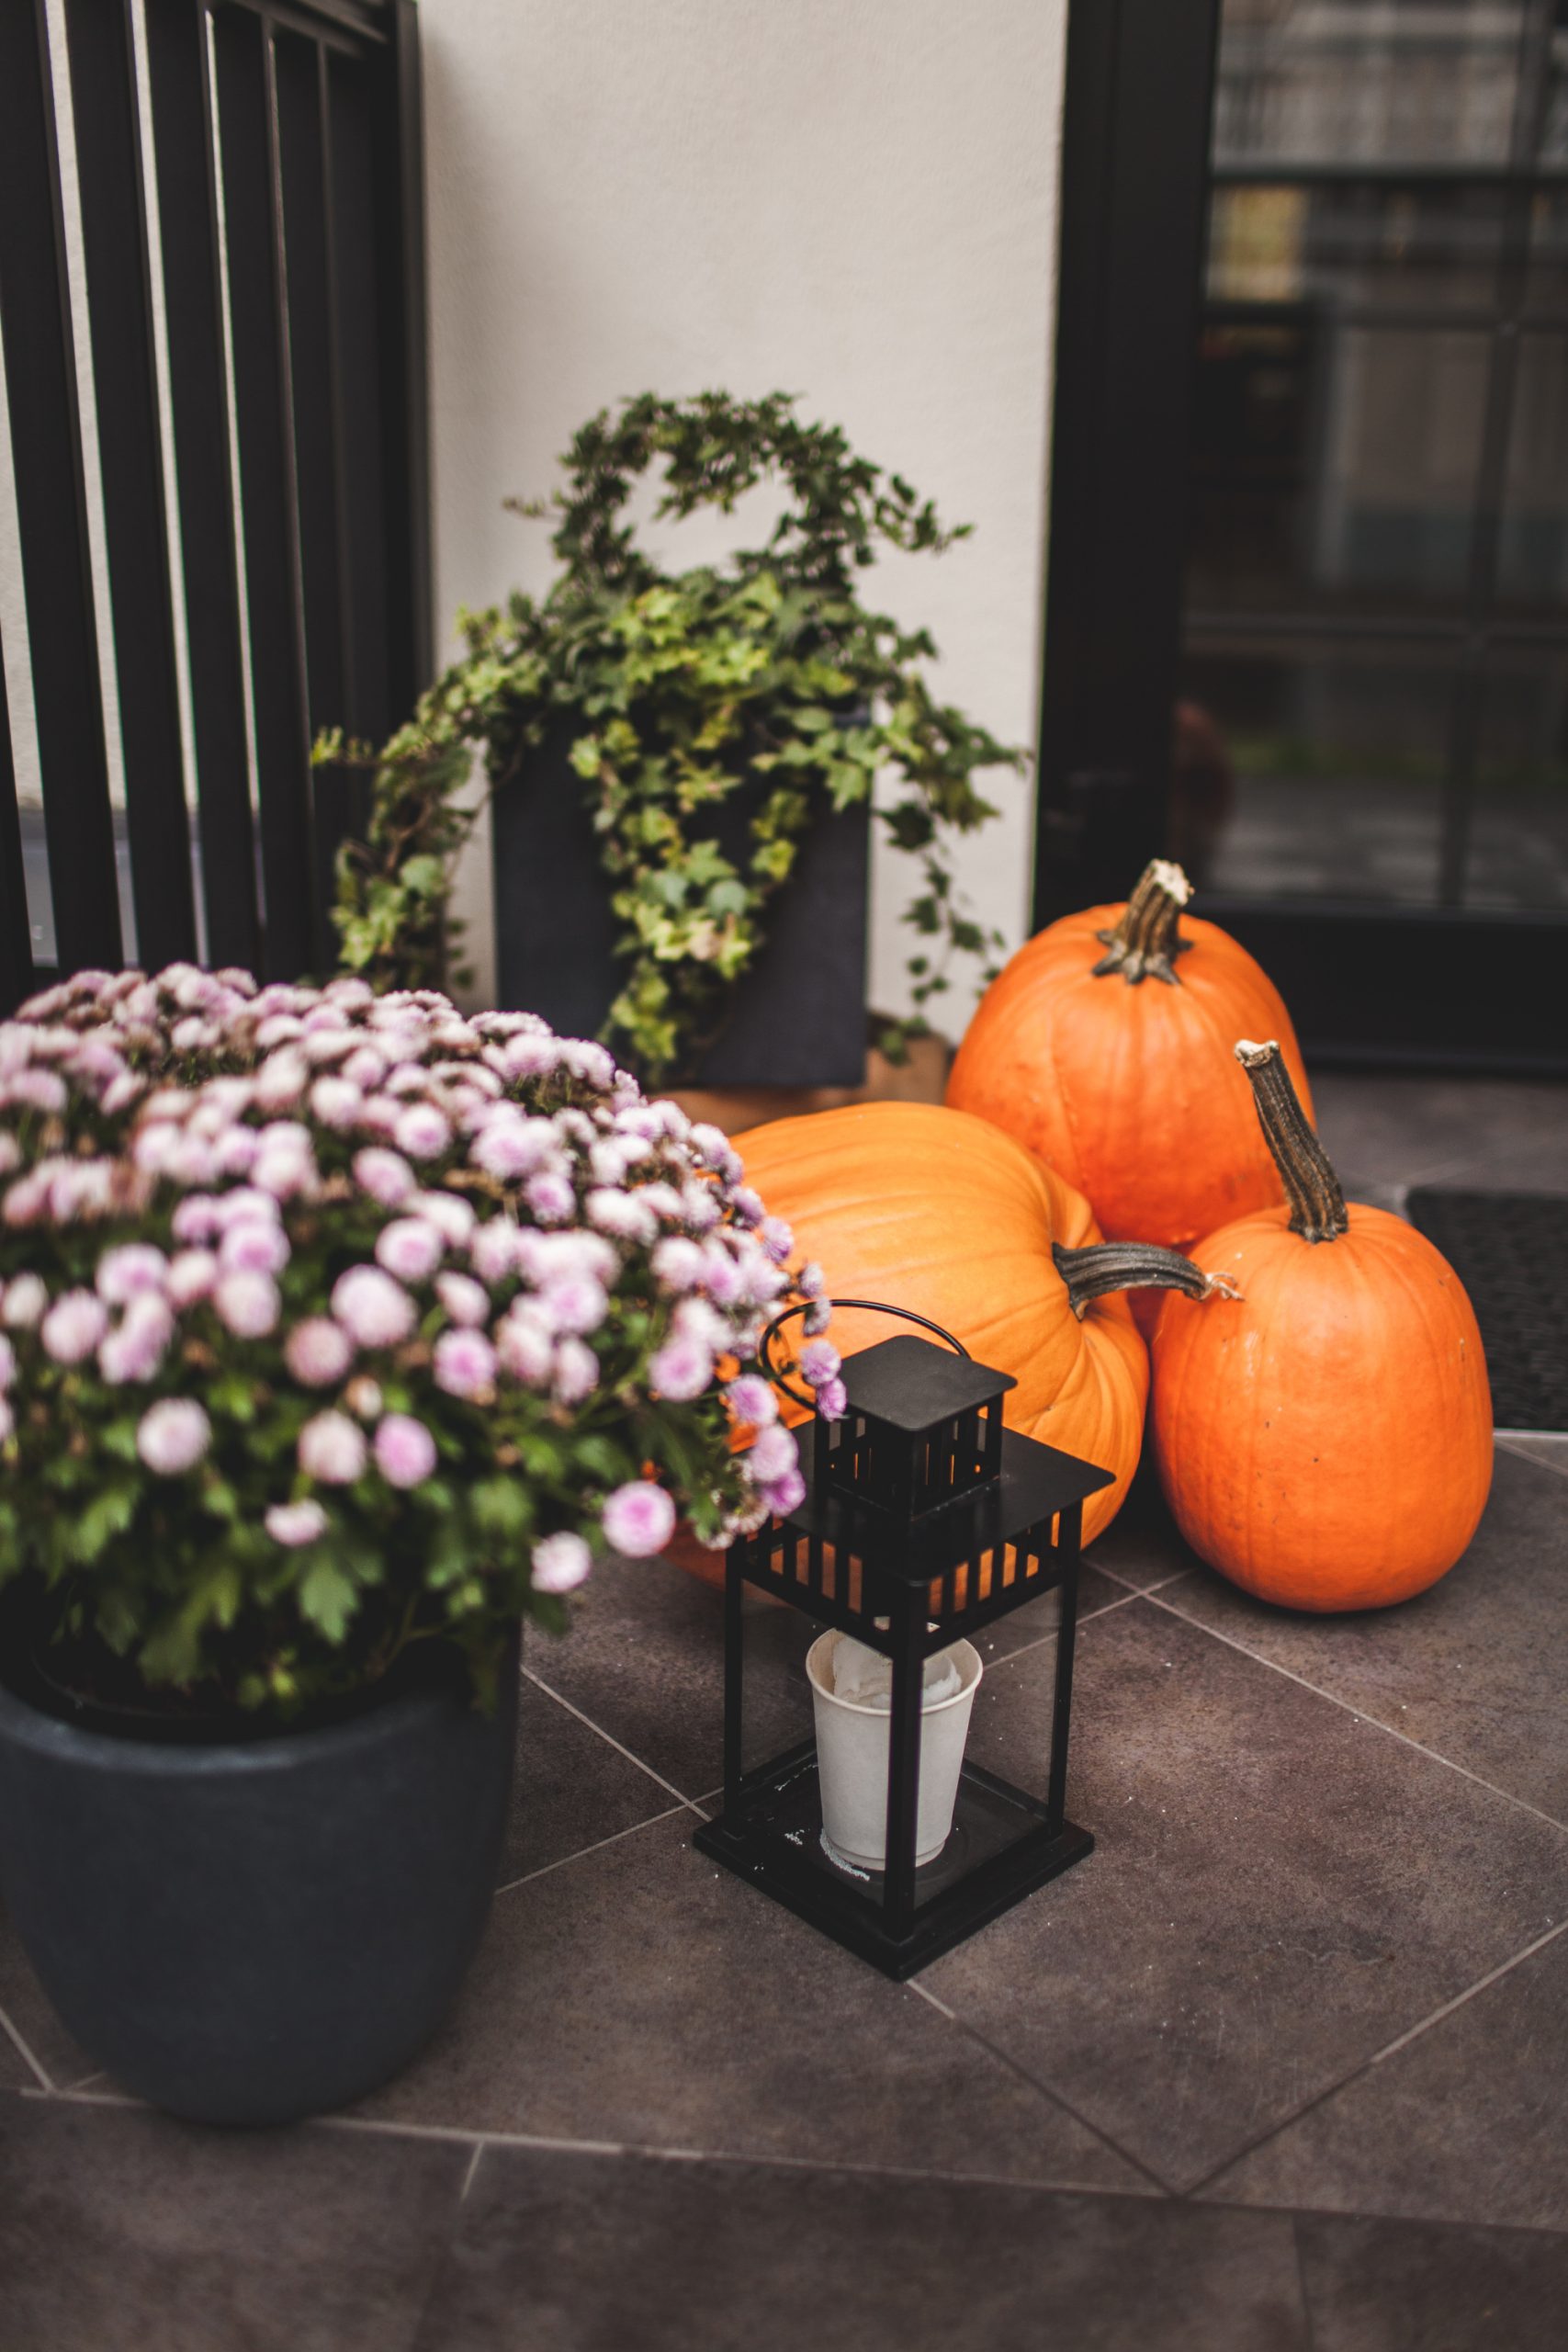 A porch with pumpkins, flowers, and a lantern.